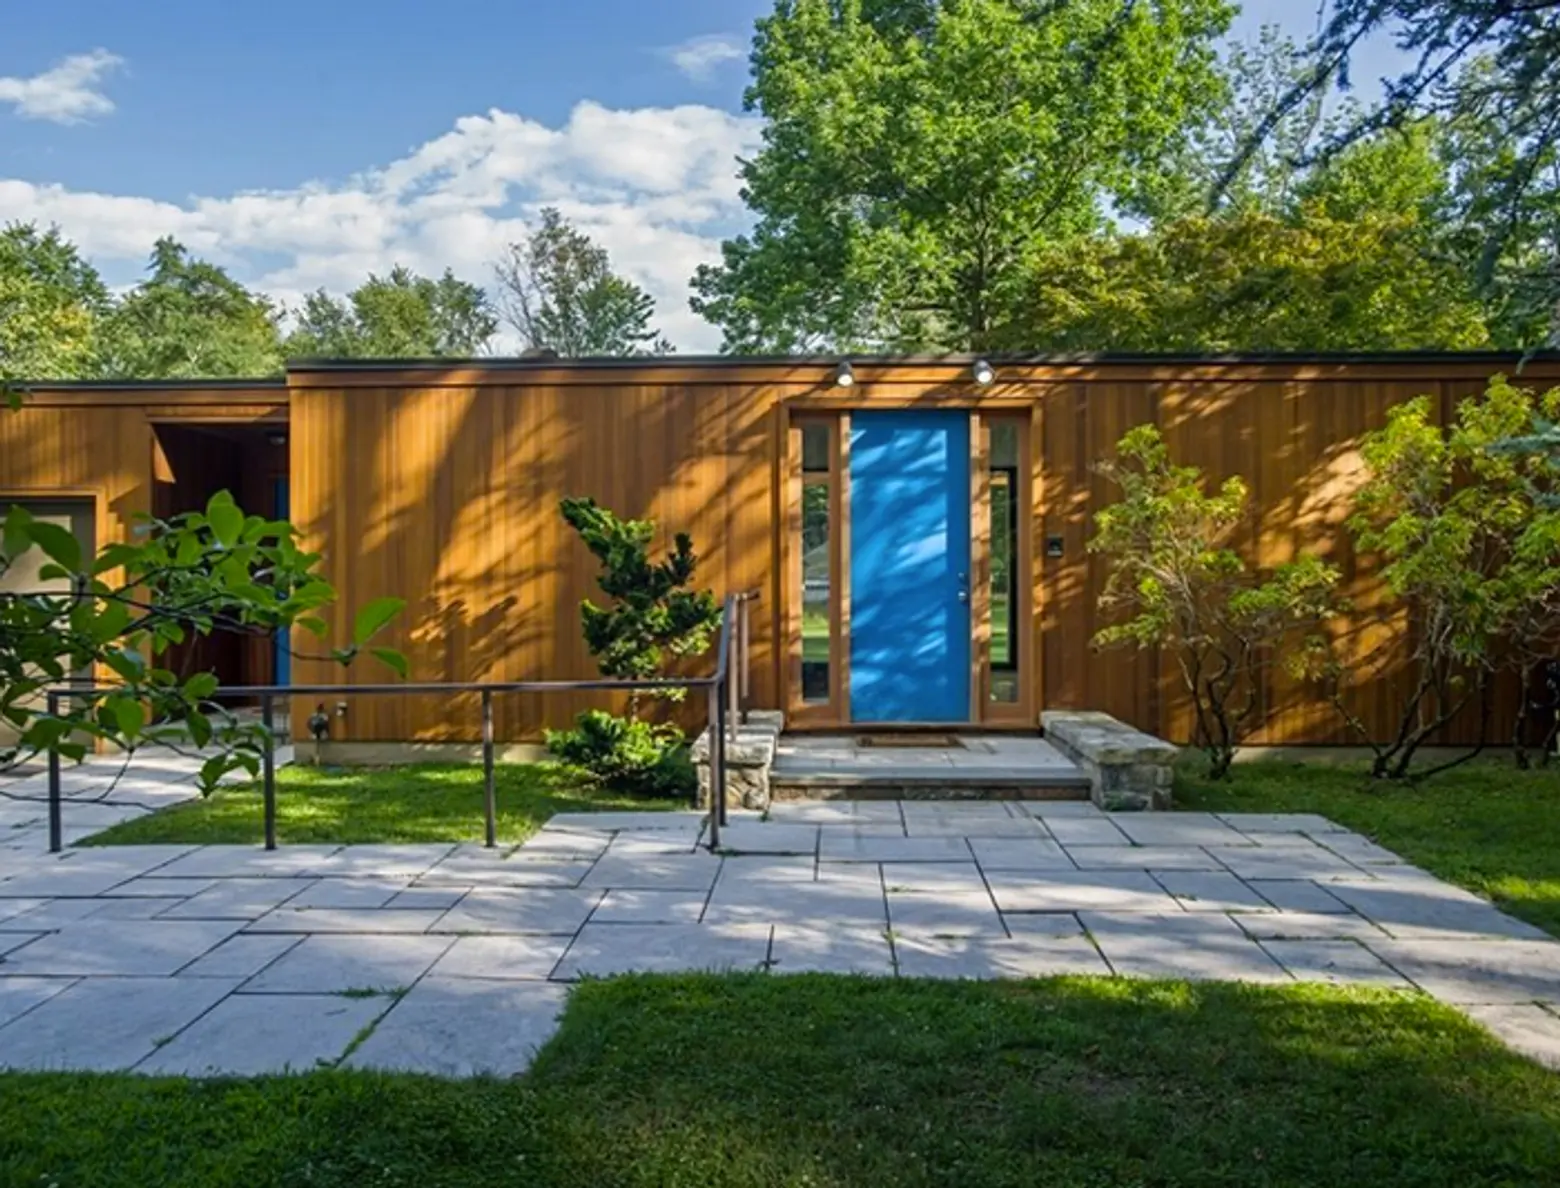 Live in the Plywood Version of Philip Johnson’s Glass House for $1.6M